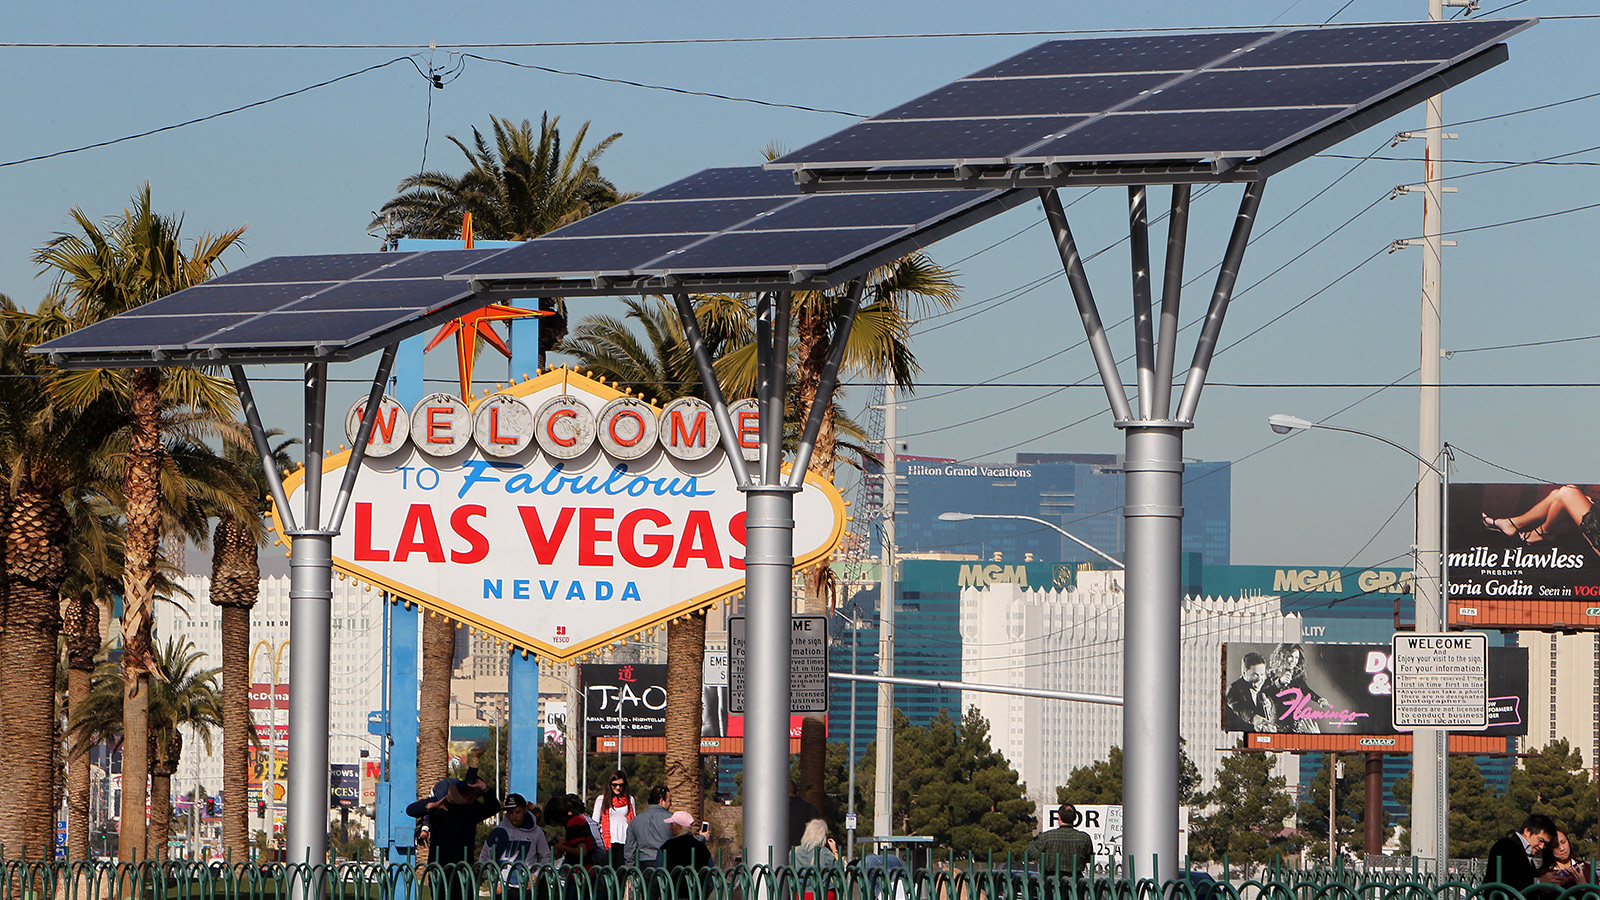 The iconic 'Welcome To Las Vegas' sign built in 1959, is now powered by solar energy as of Jan. 8. The three 25- foot tall 'Solar Tree' towers, with photovoltiac cell arrays , power the famous sign. A public-private partnership of community groups and businesses came together to design and fully fund the project.